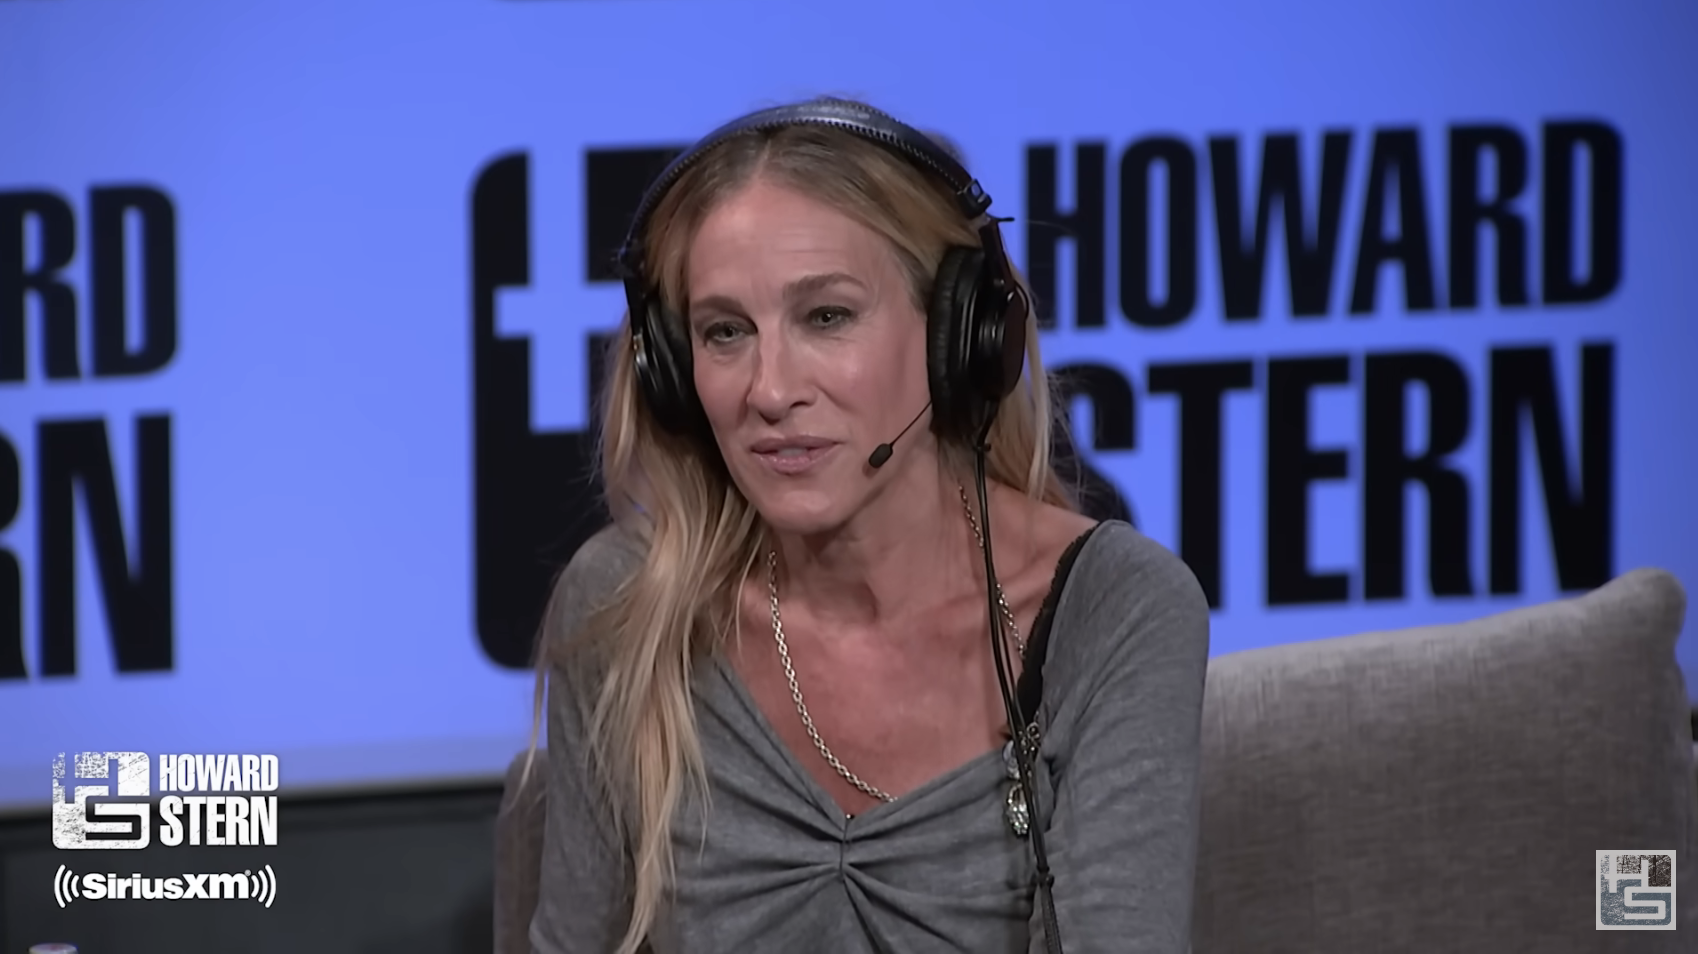 Close-up of SJP on the Howard Stern set, wearing headphones